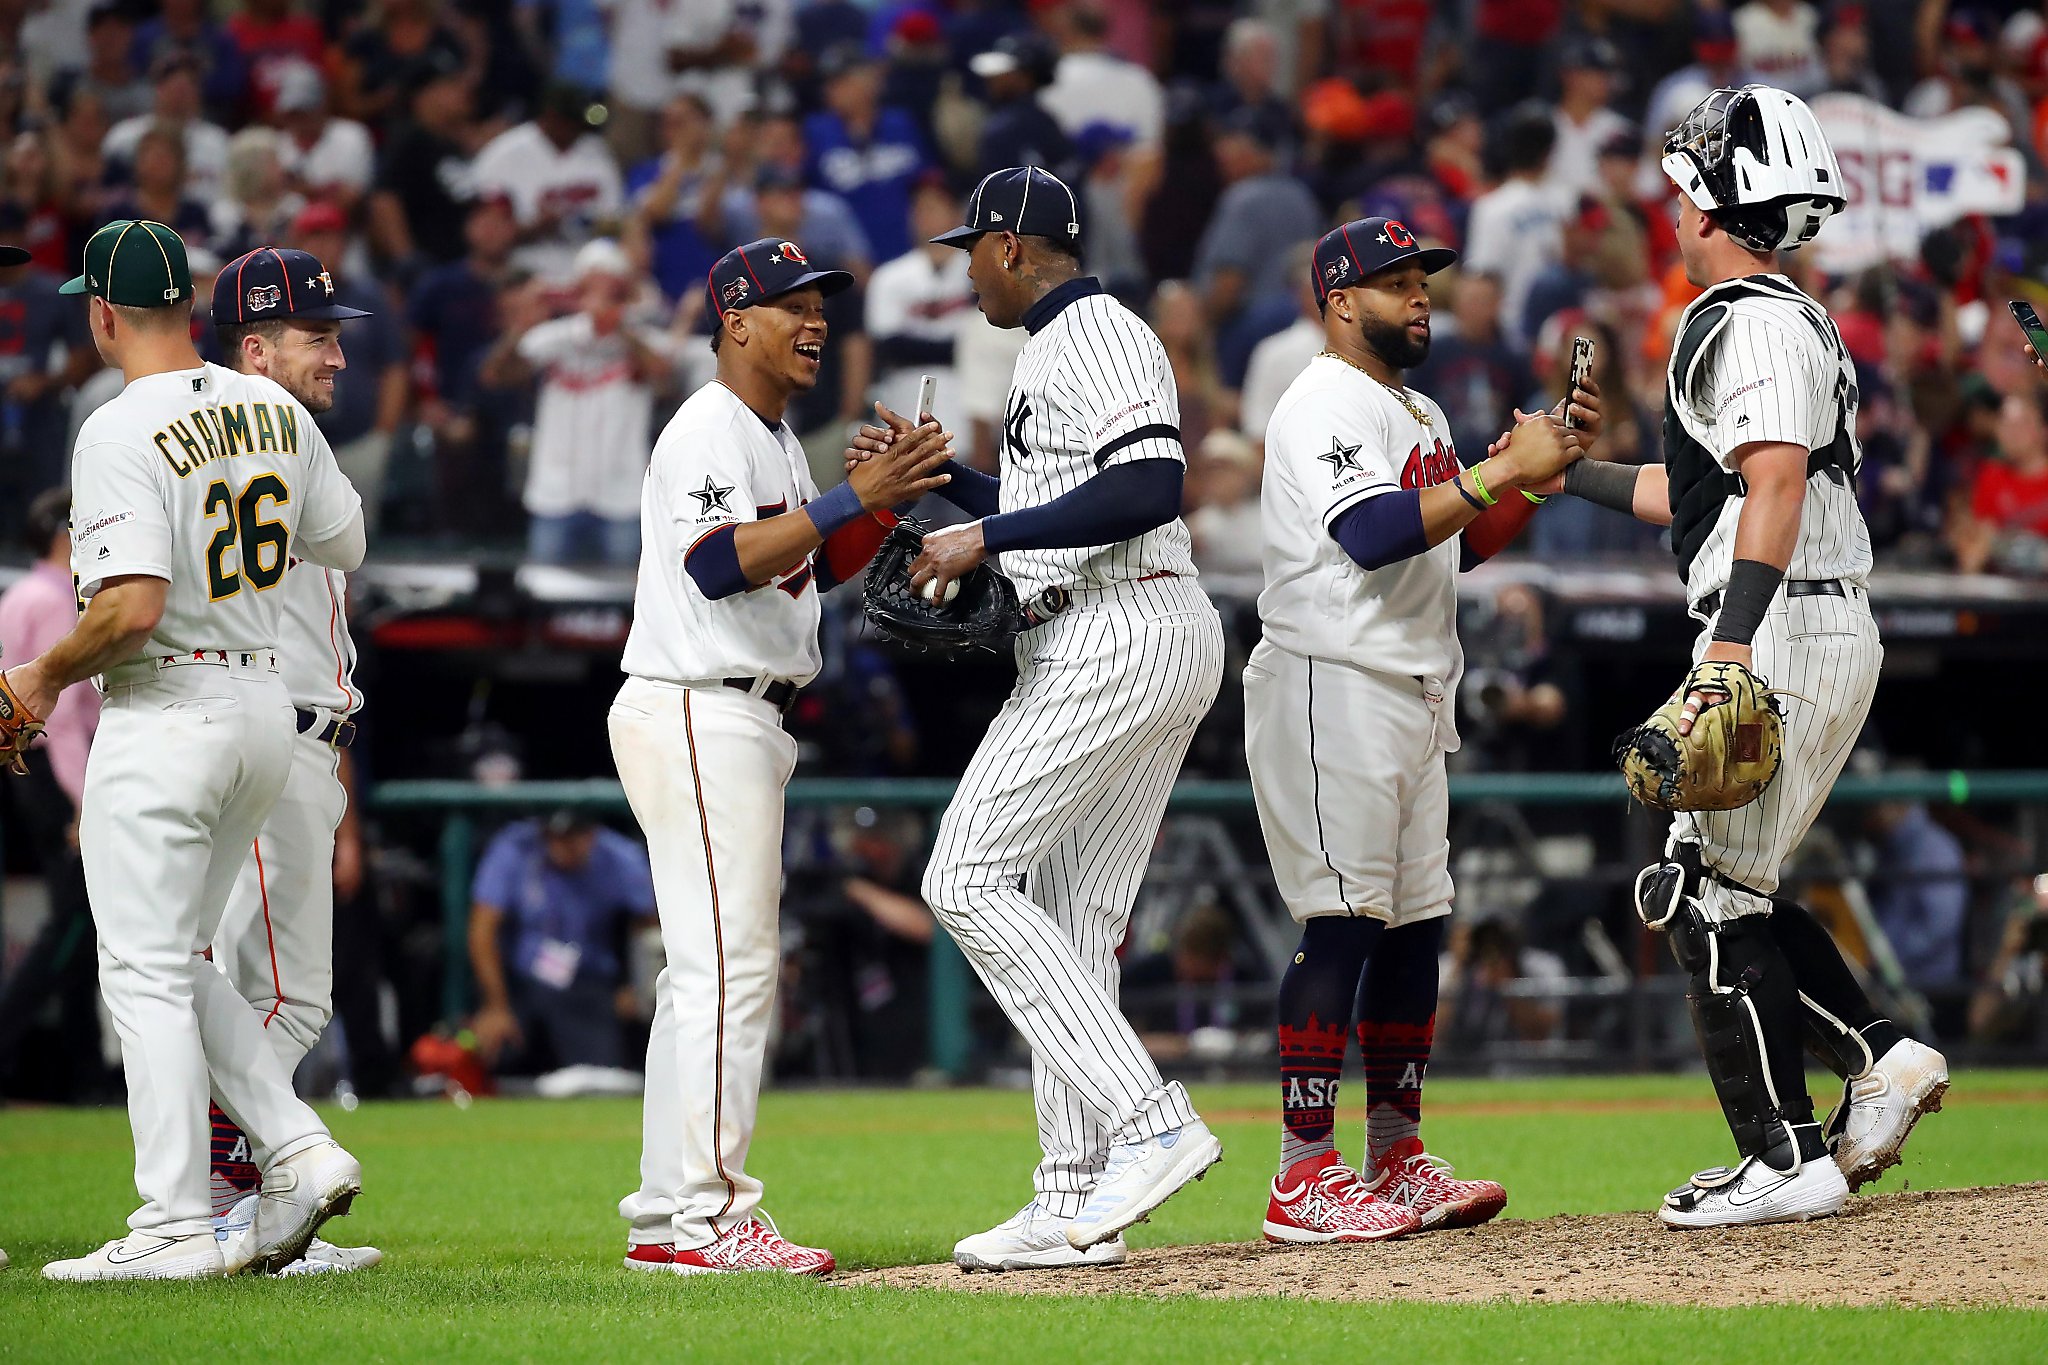 MLB cancels 2020 All-Star Game due to COVID-19 pandemic